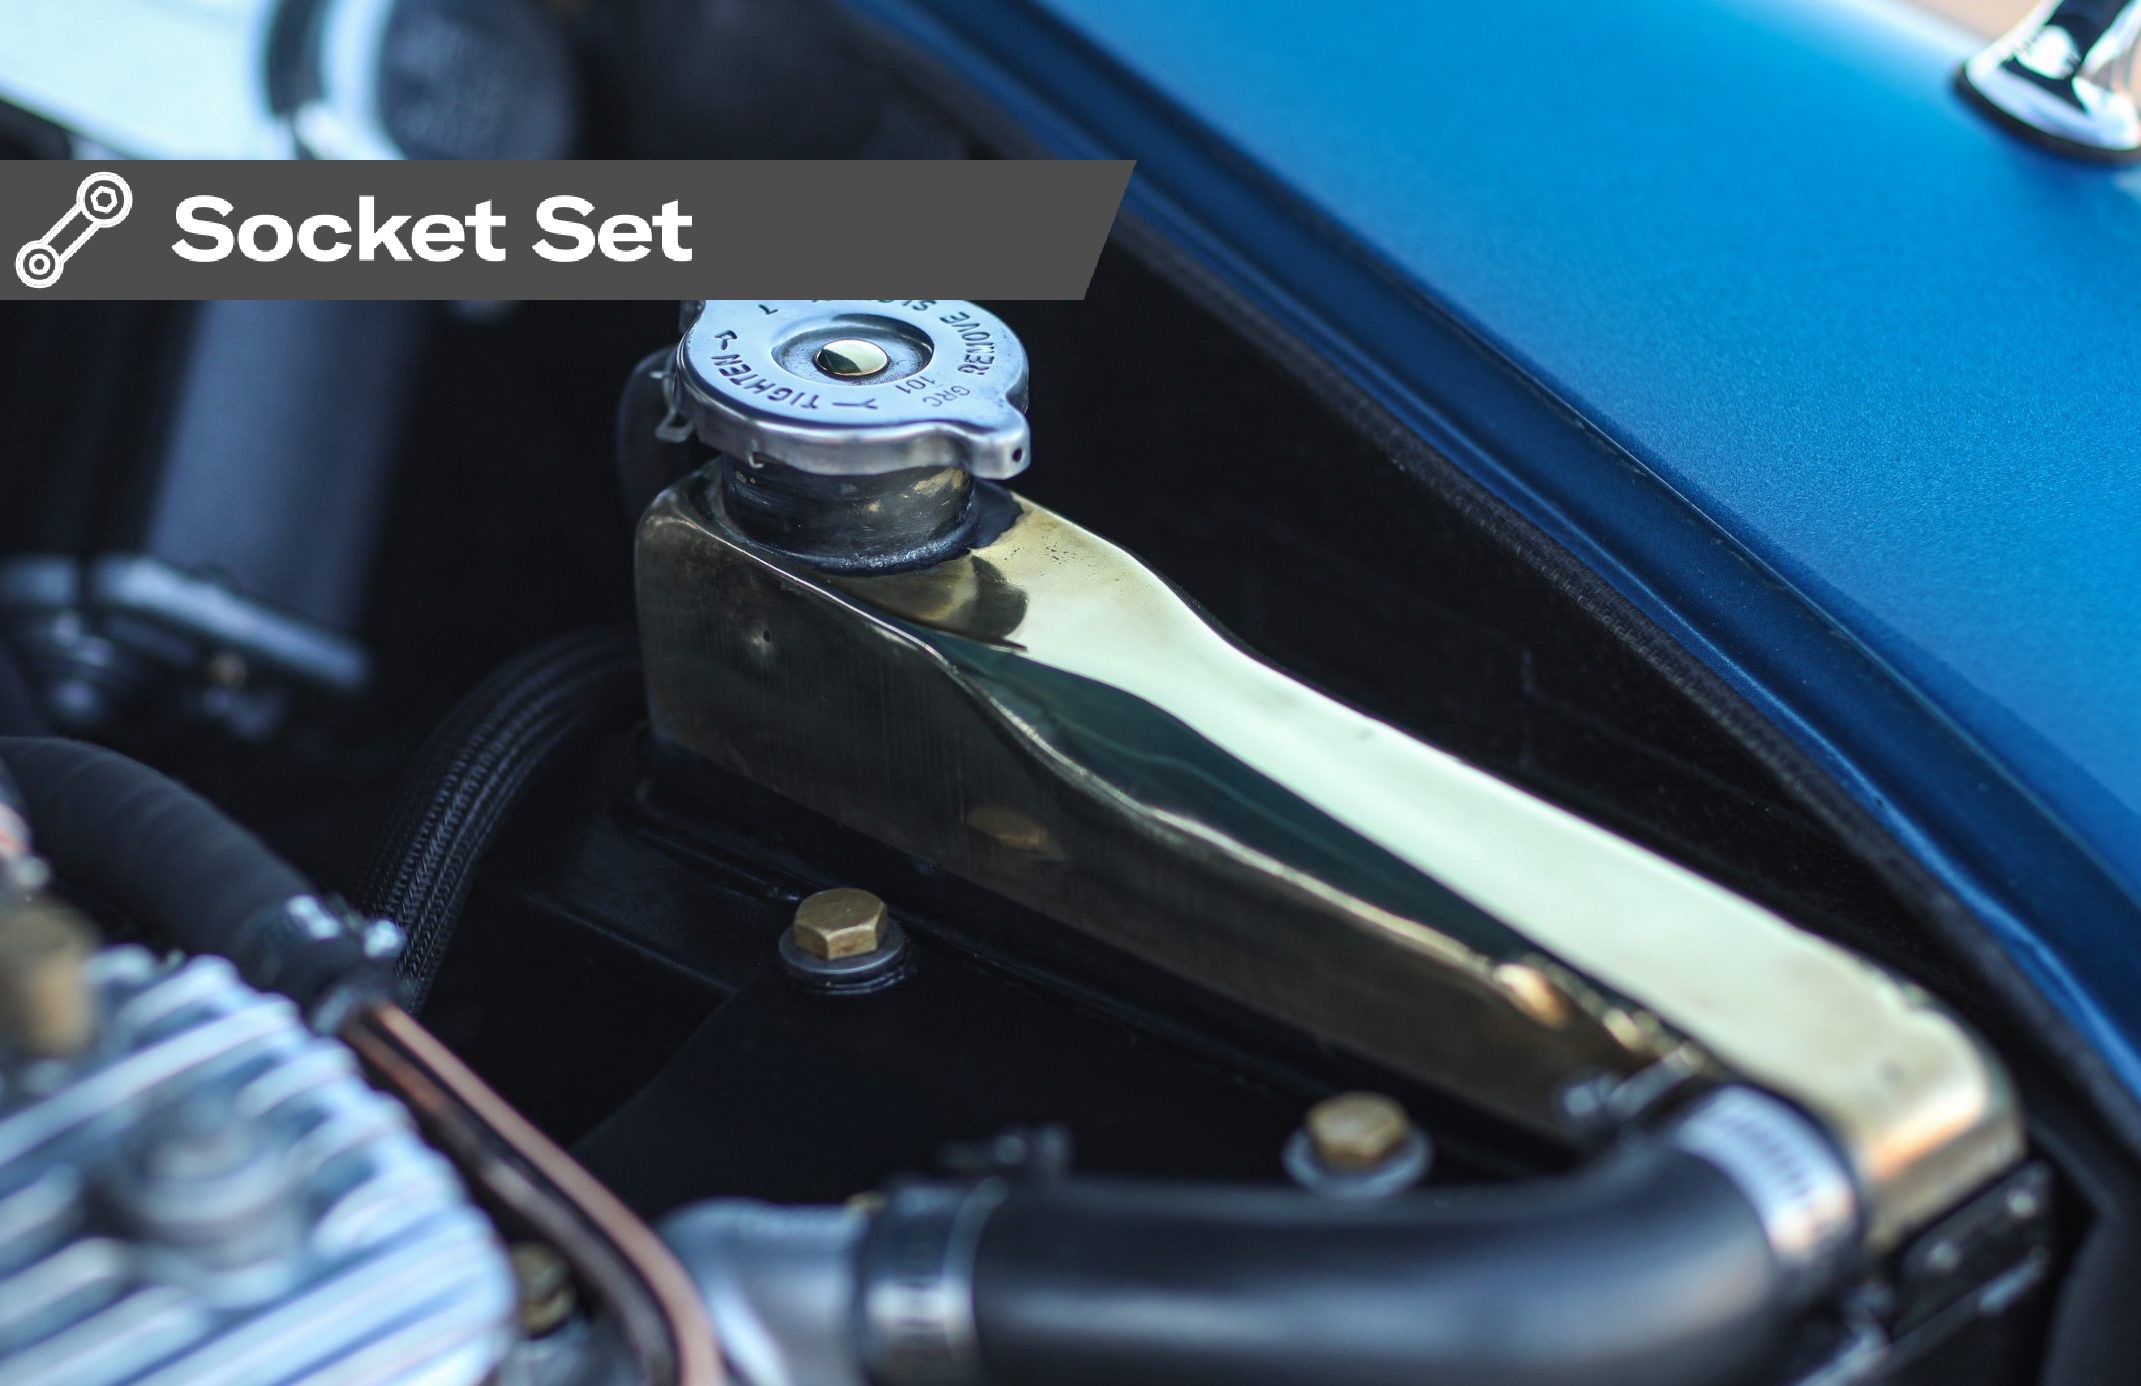 Socket Set: Maintaining your car’s cooling system